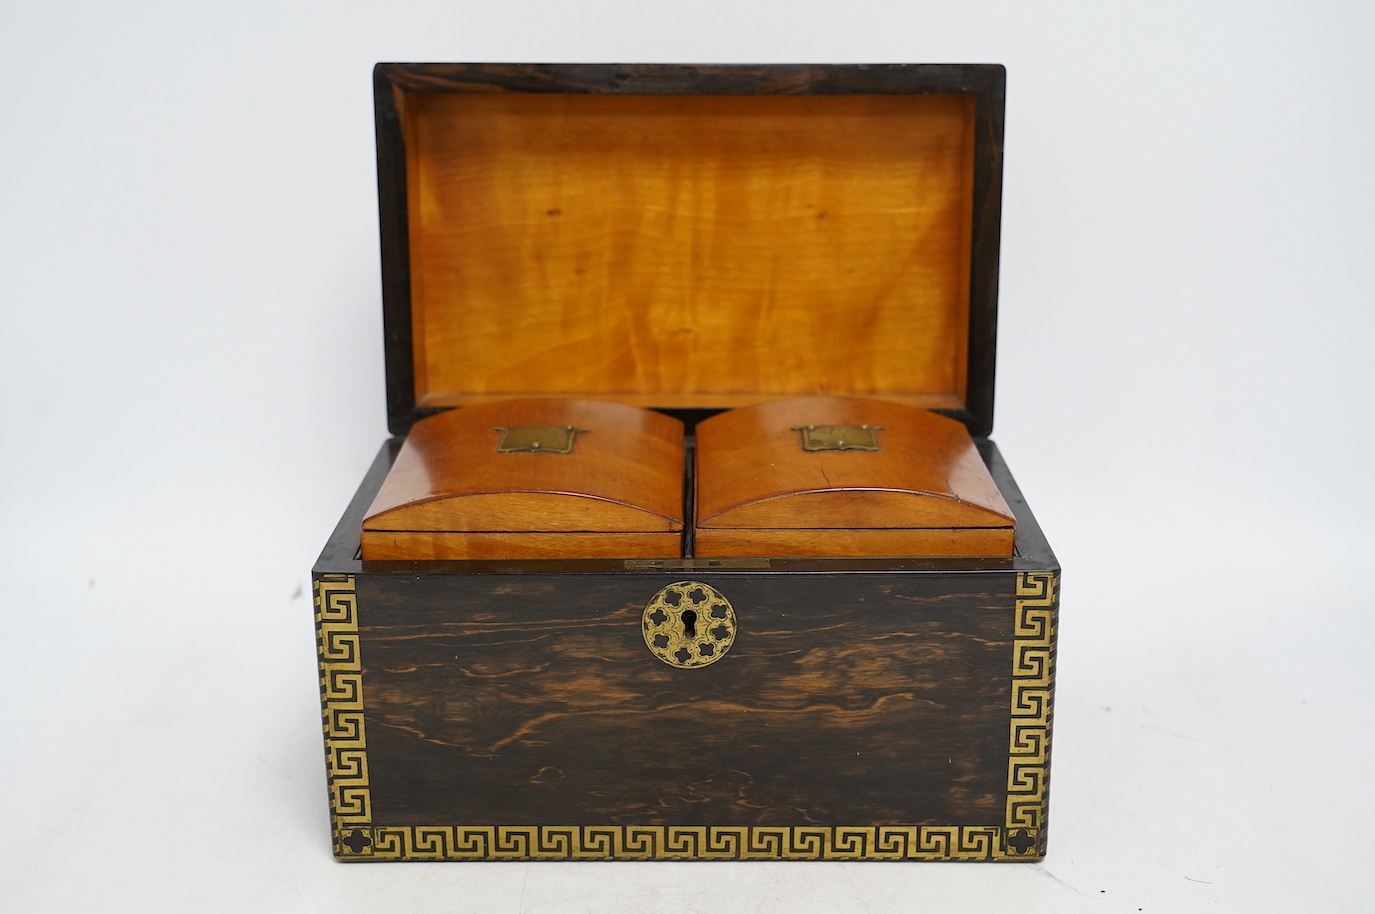 An early 19th century brass inlaid coromandel tea caddy with birch lining, 25cm wide. Condition - fair